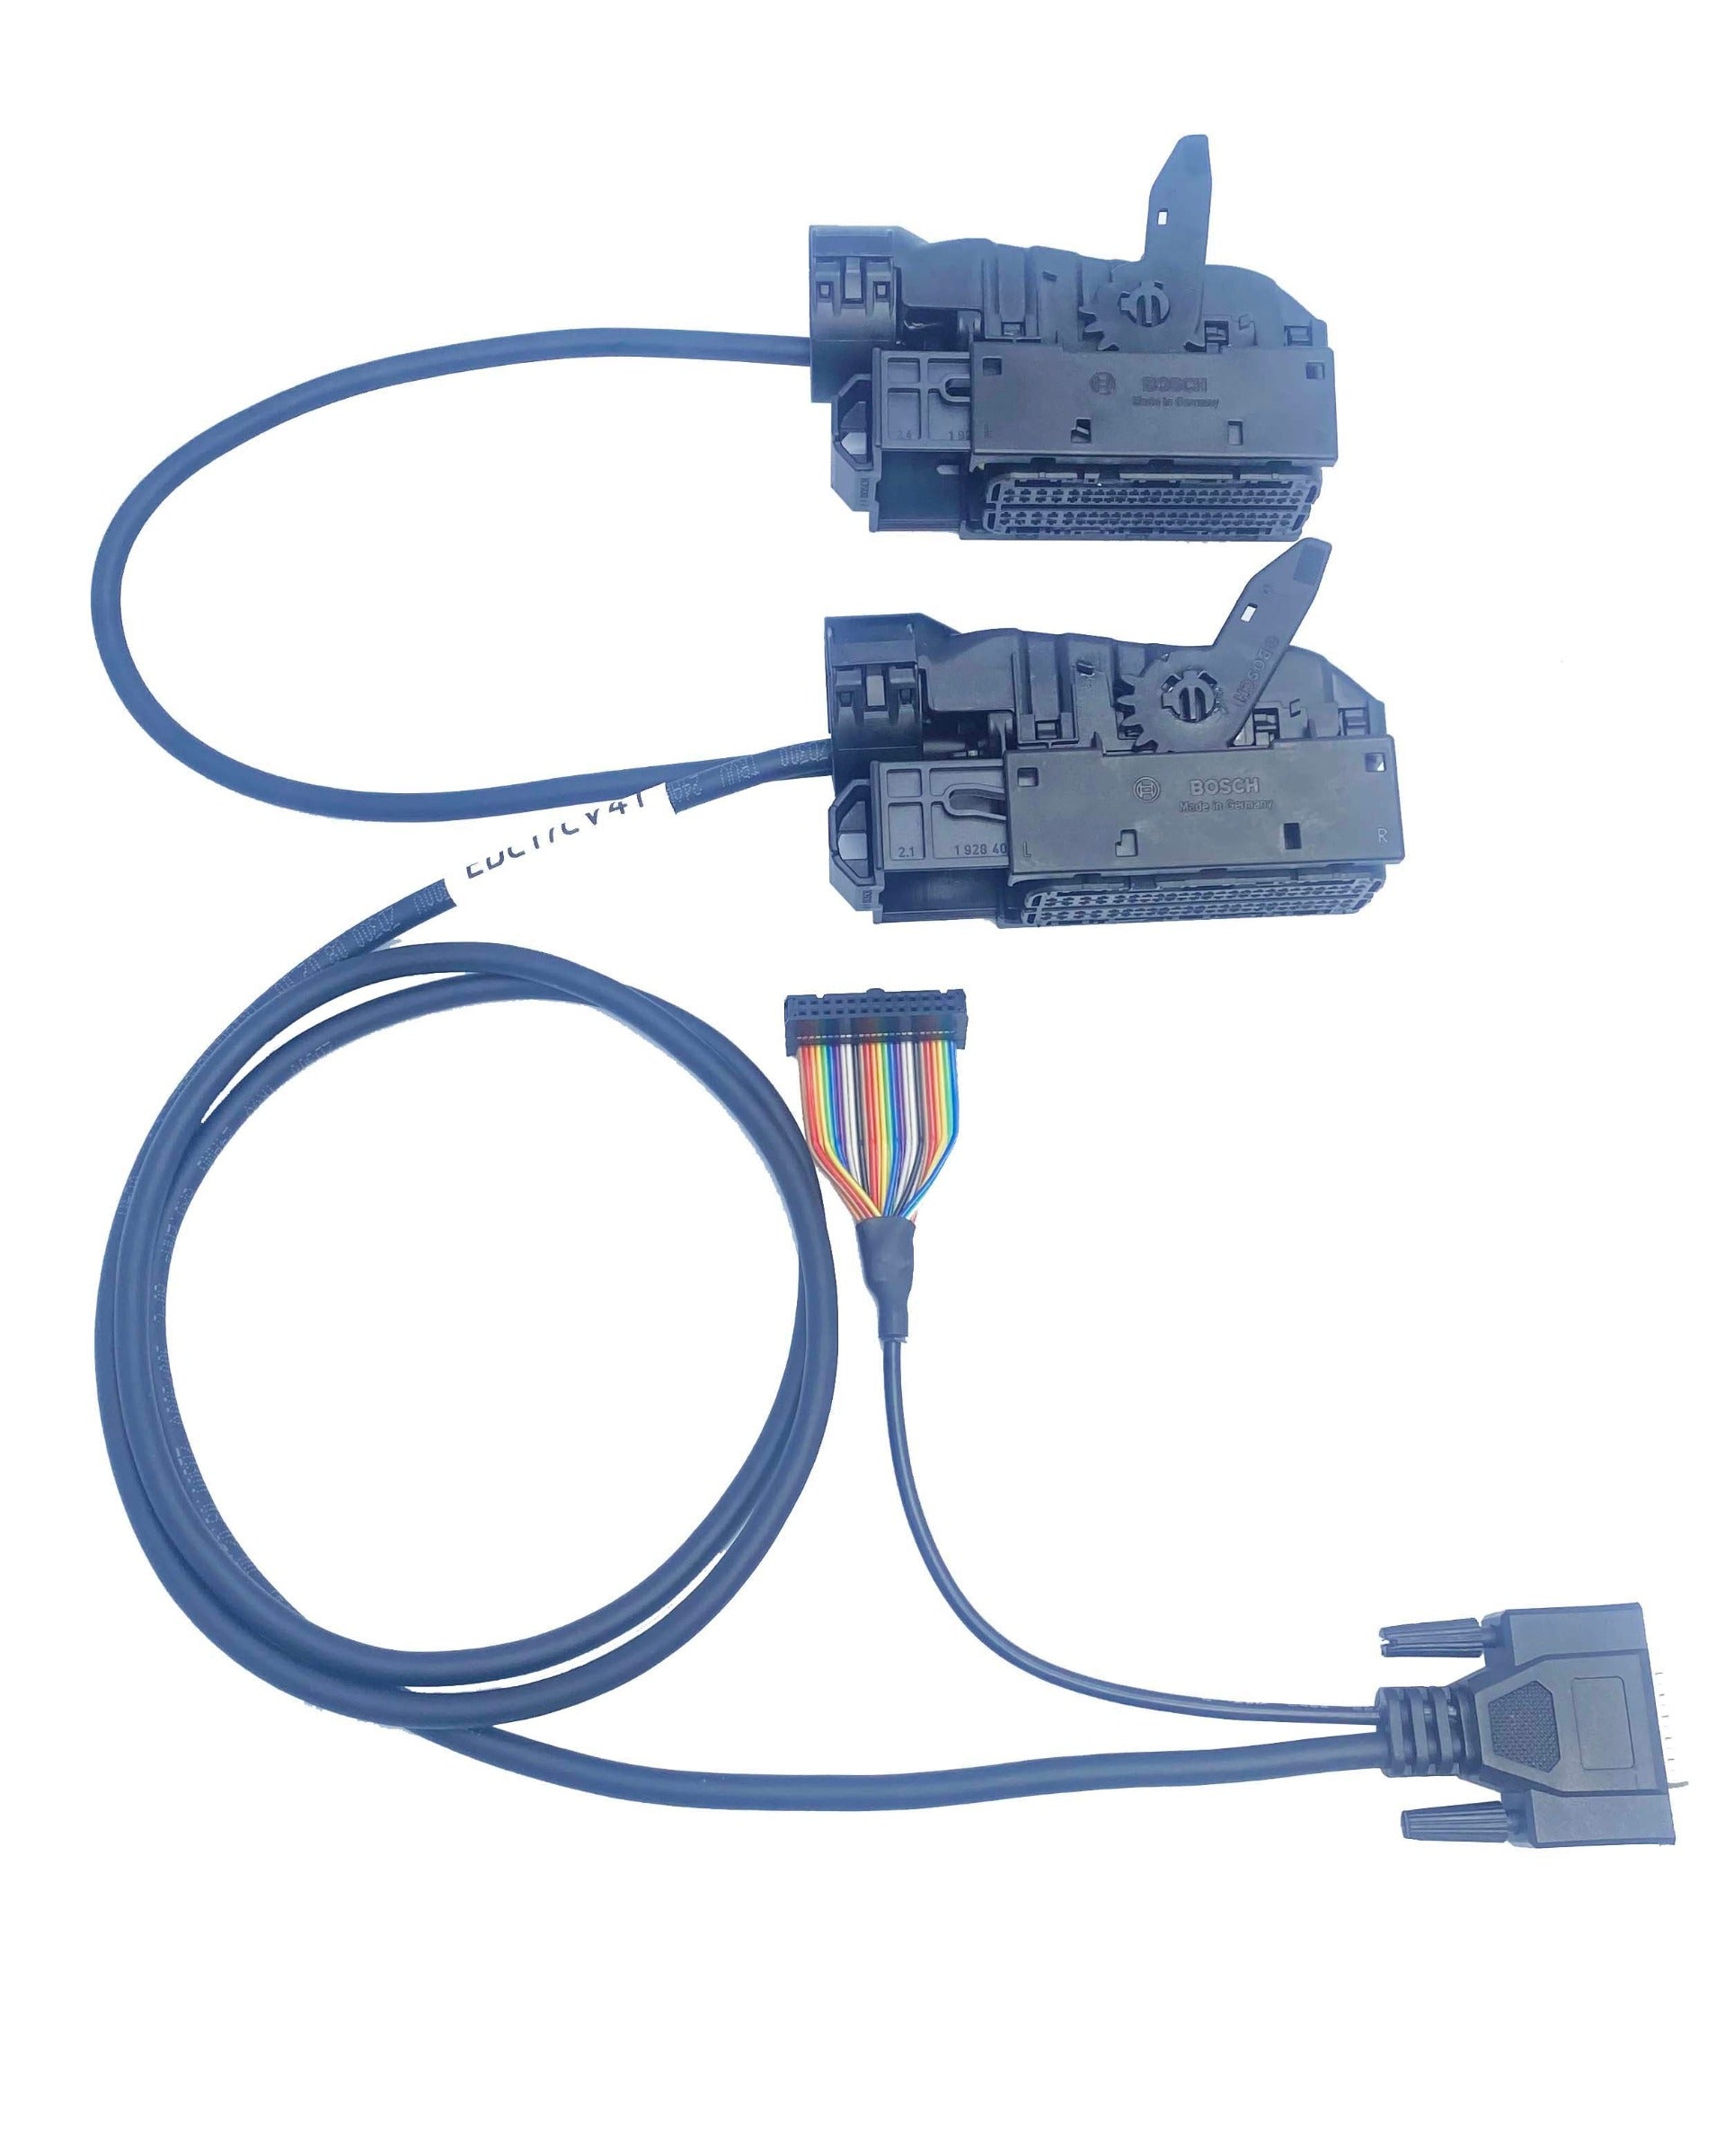 Bosch EDC17CV41 ECU bench remapping cable for chiptuning, ktag tool